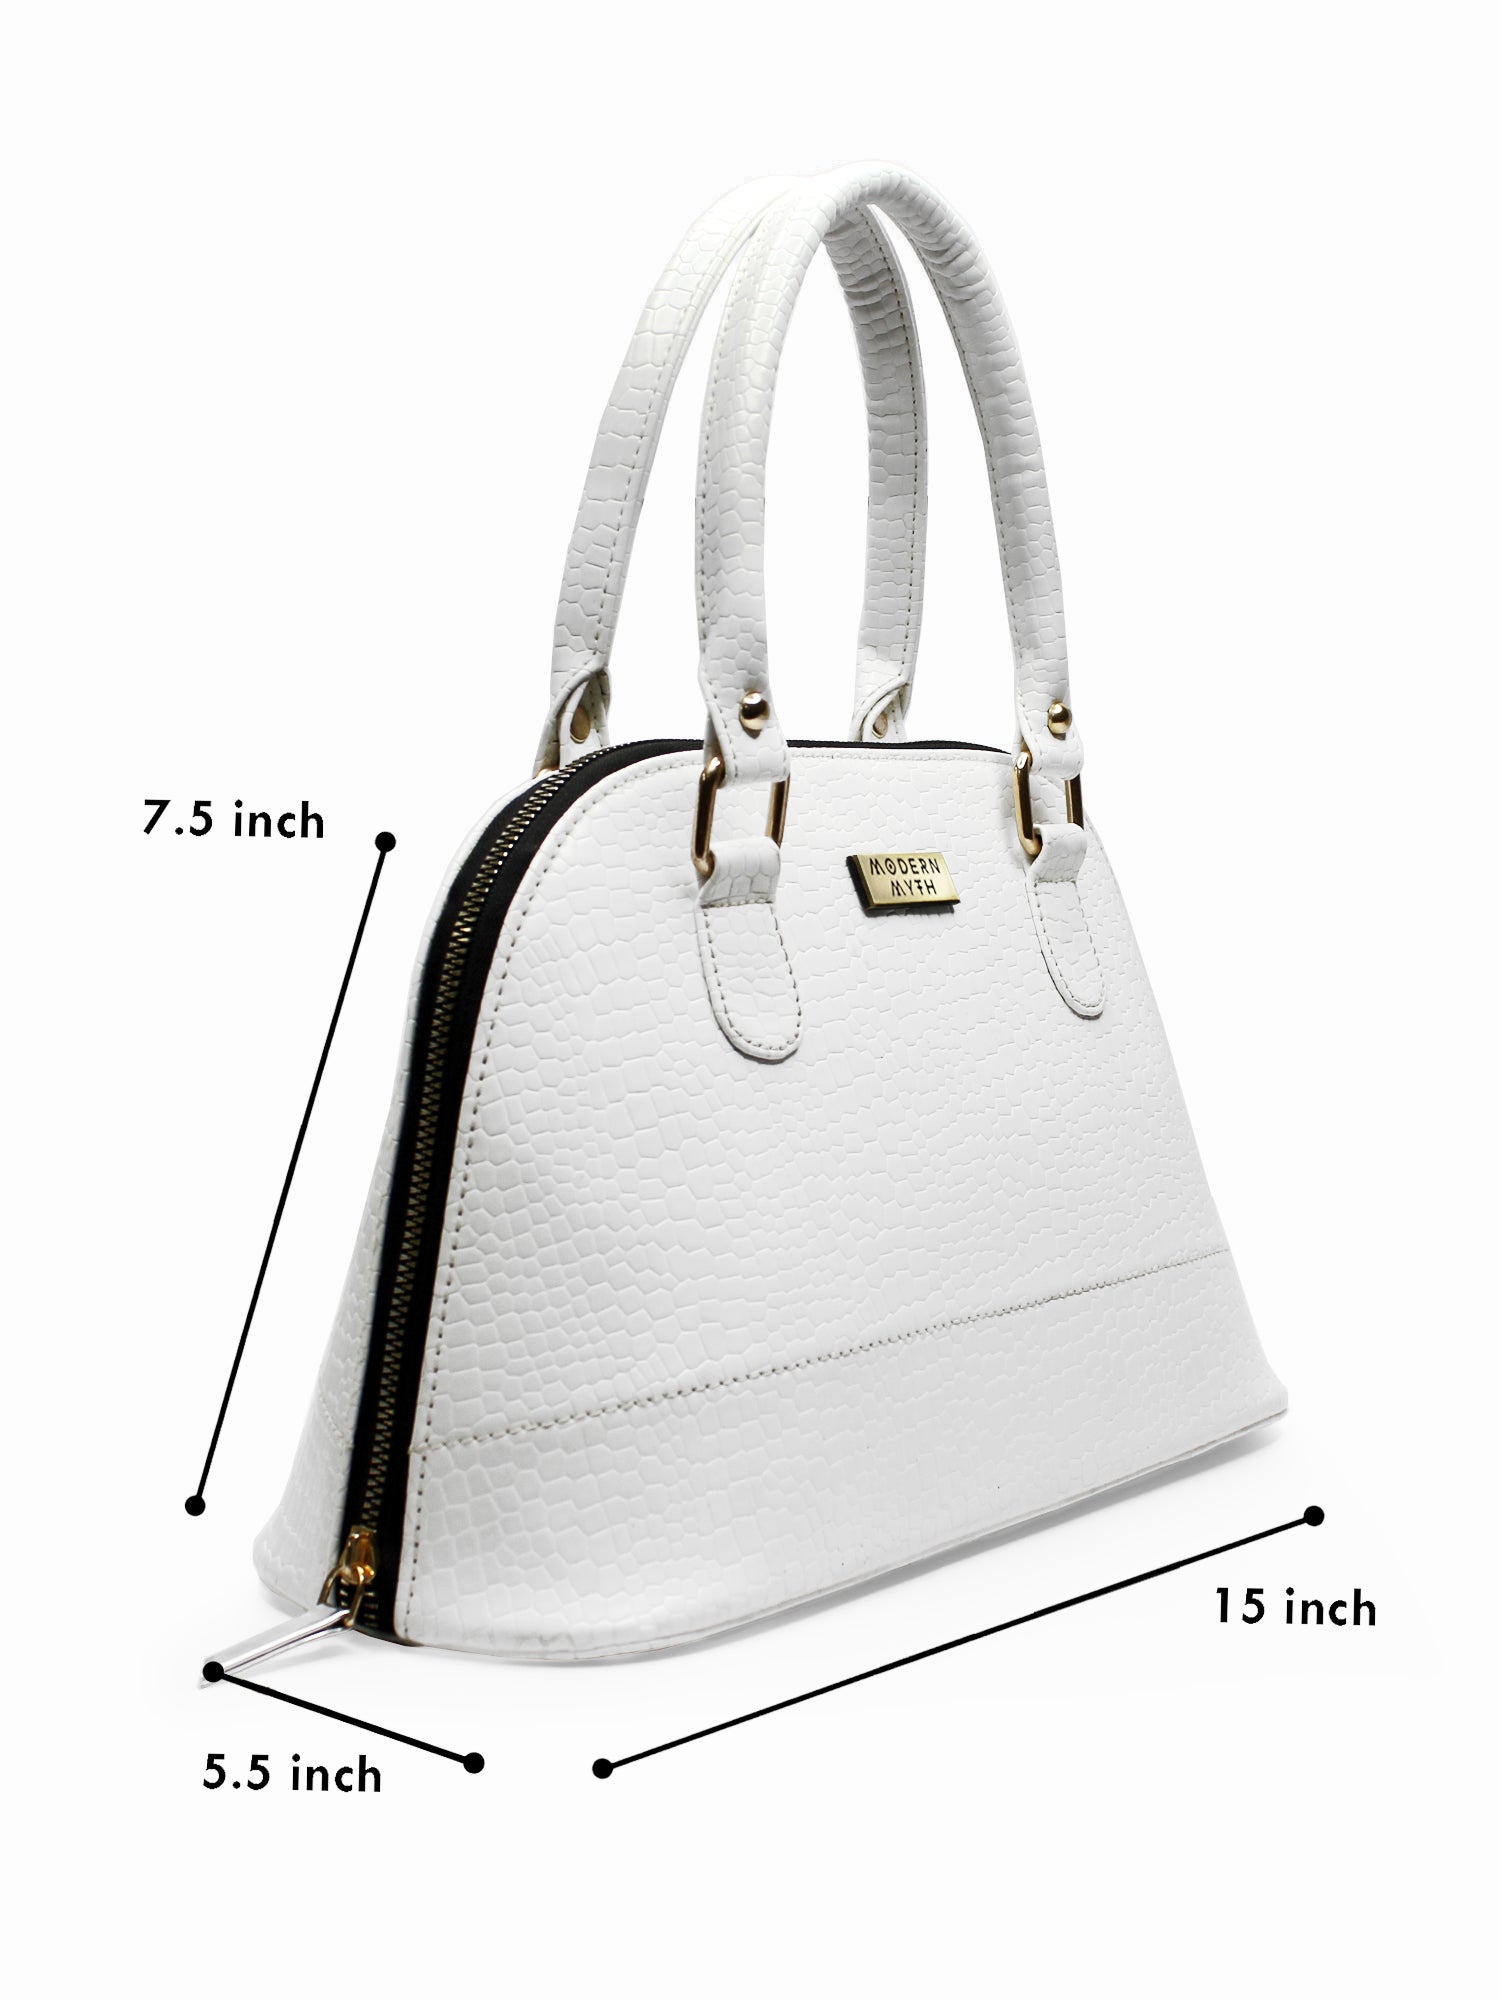 Shop Handbags For Women From Top Brands Online At Upto 80% Off